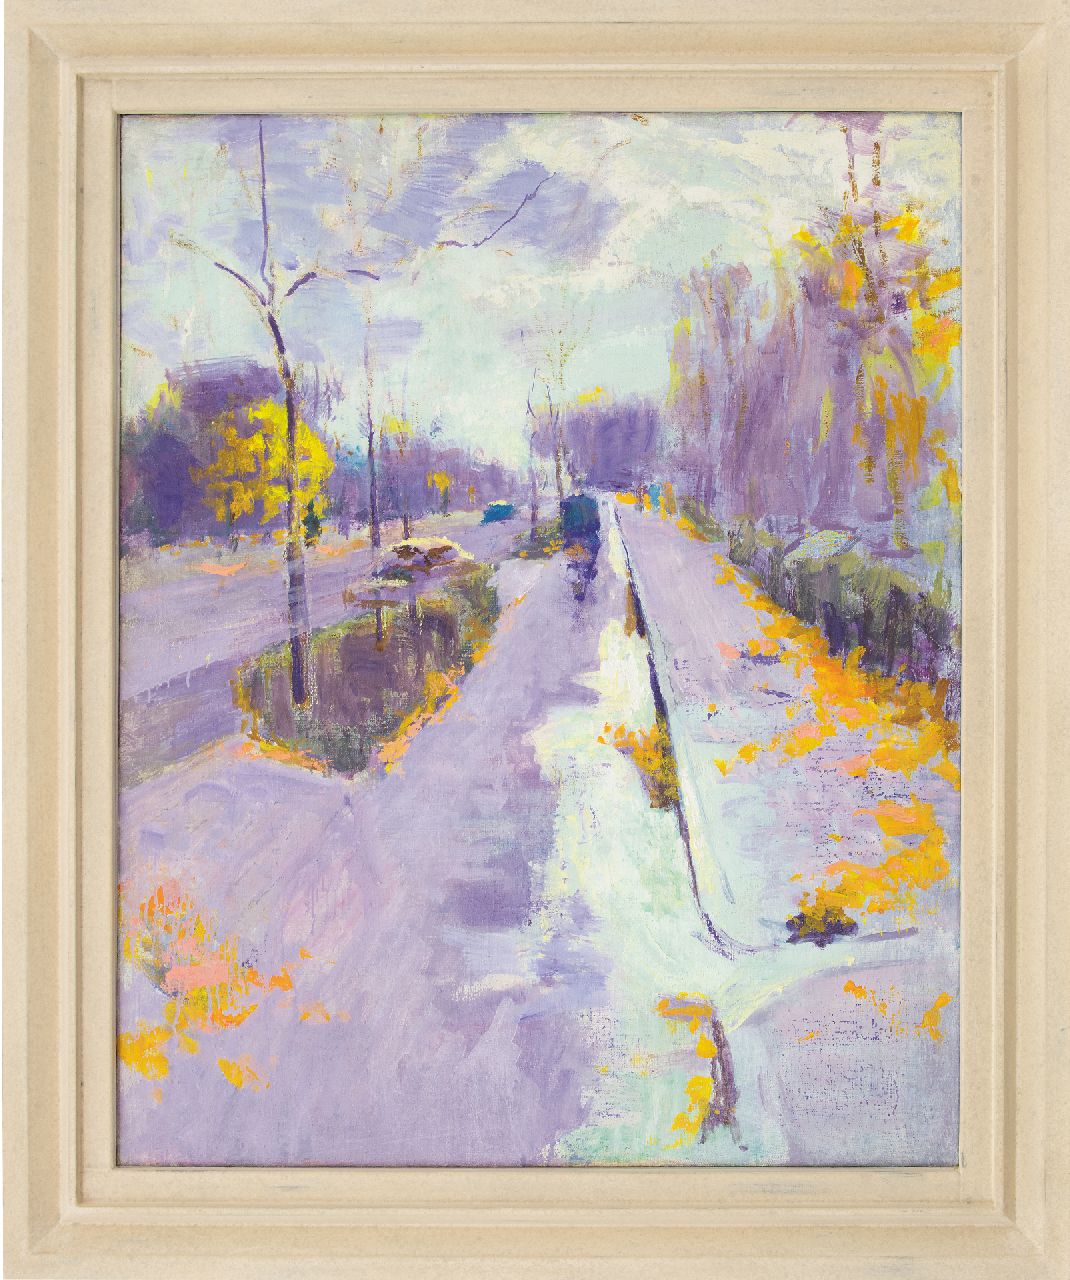 Altink J.  | Jan Altink, Cyclist on the Herenweg in Groningen, oil on canvas 100.4 x 80.1 cm, painted end 1920's